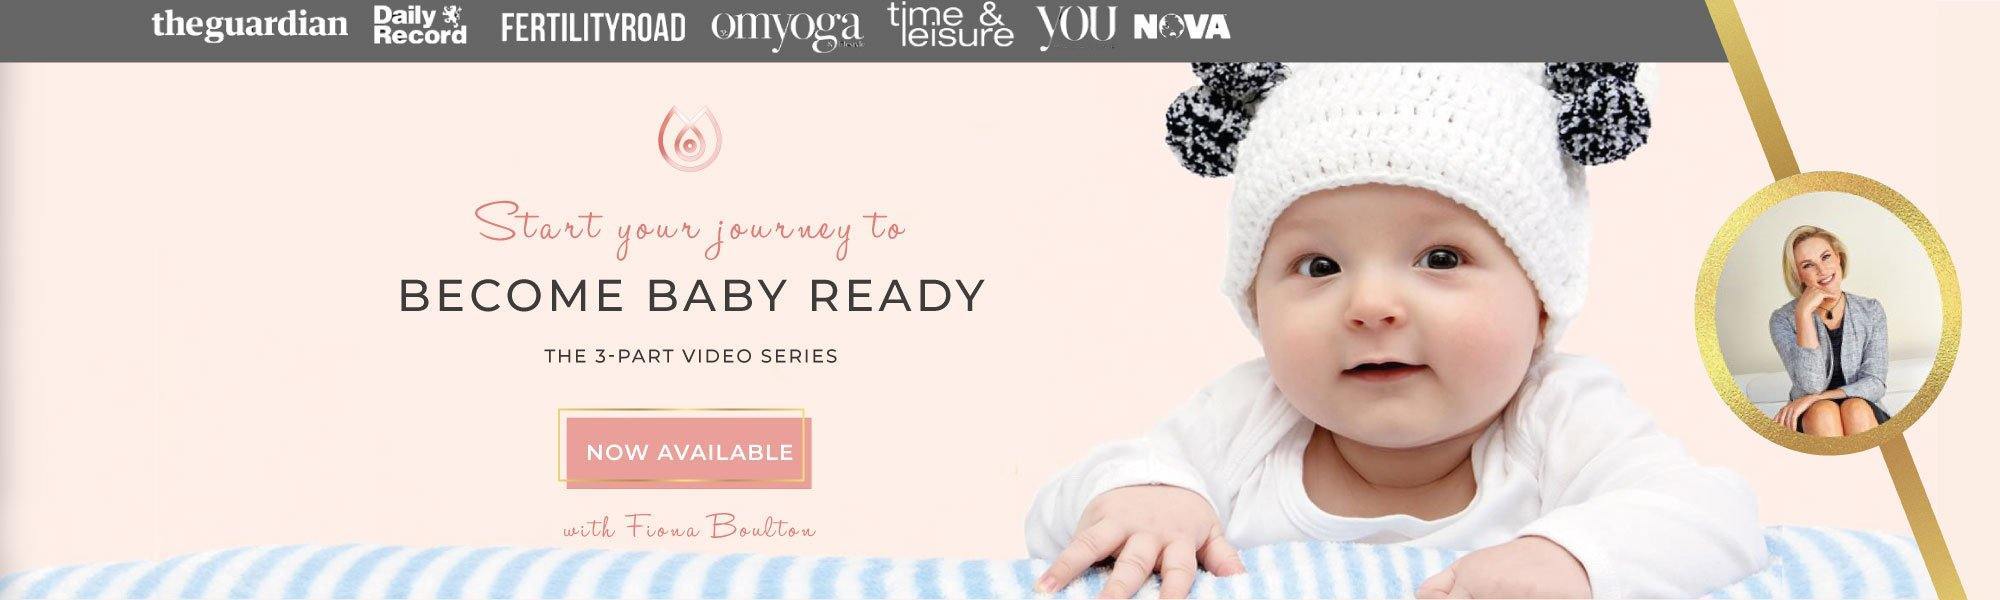 Become Baby Ready - Powerfully Pure